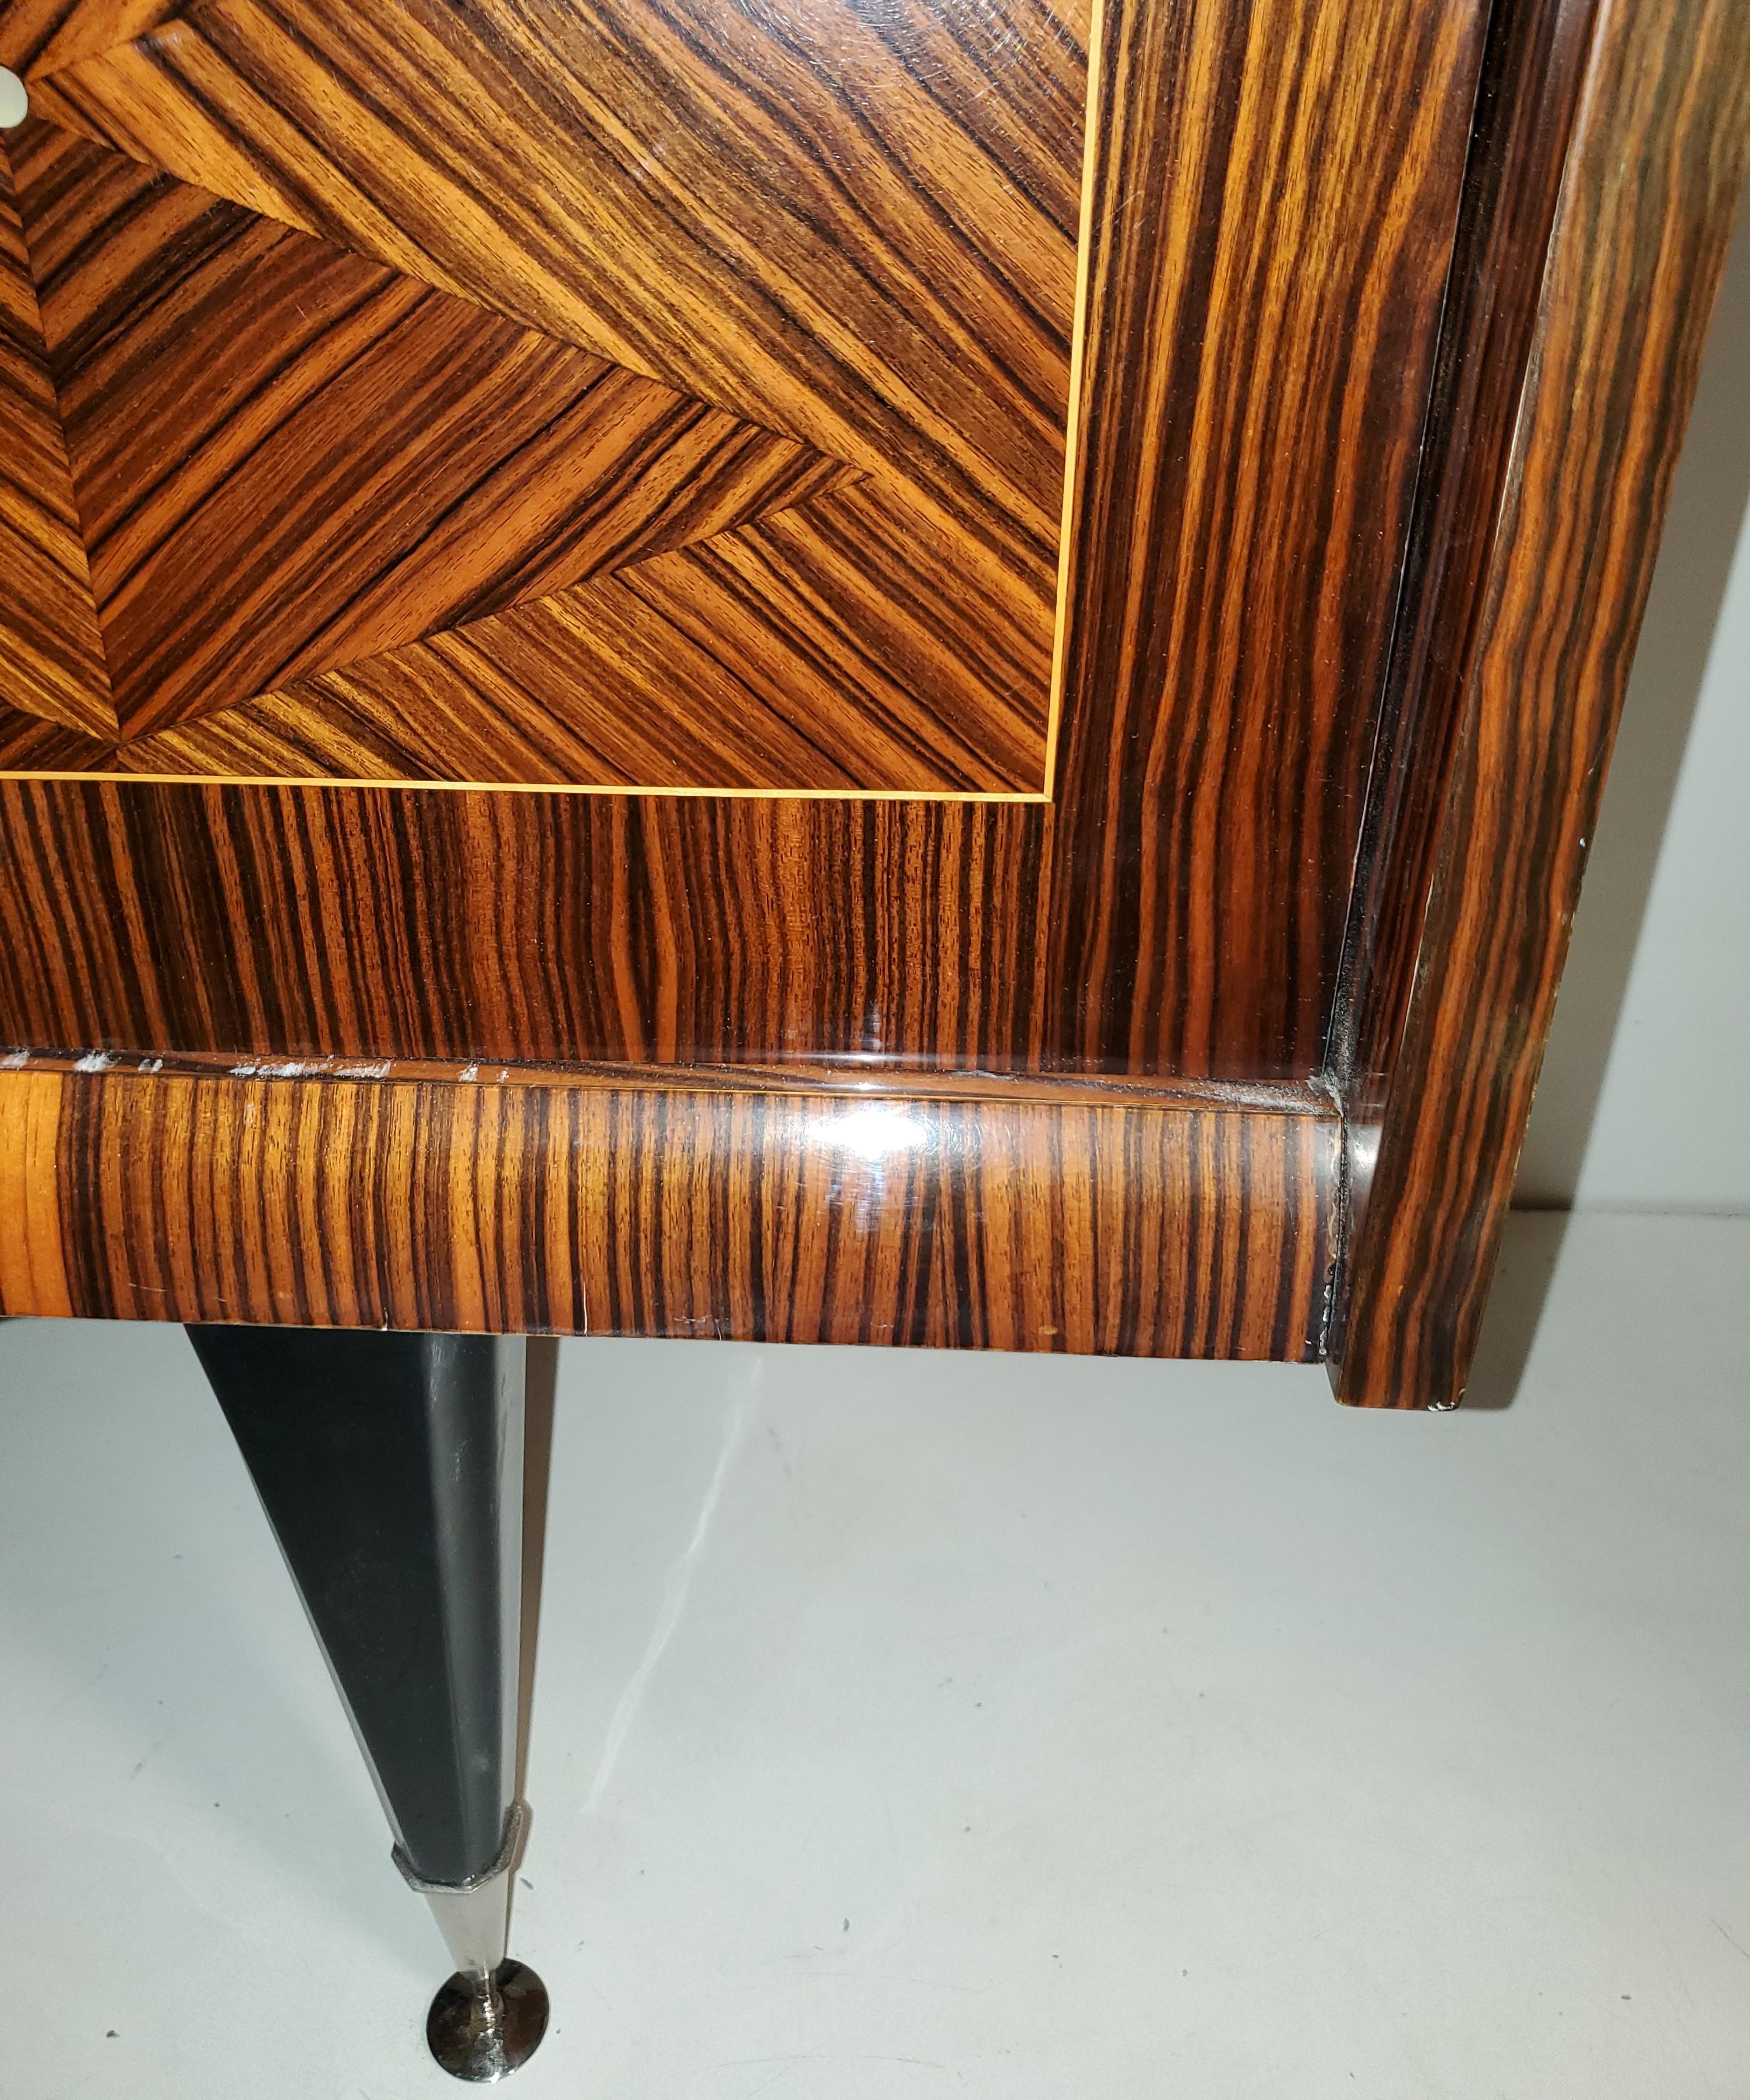 Tall and Narrow Original French Macassar Ebony Inlaid Cabinet For Sale 4